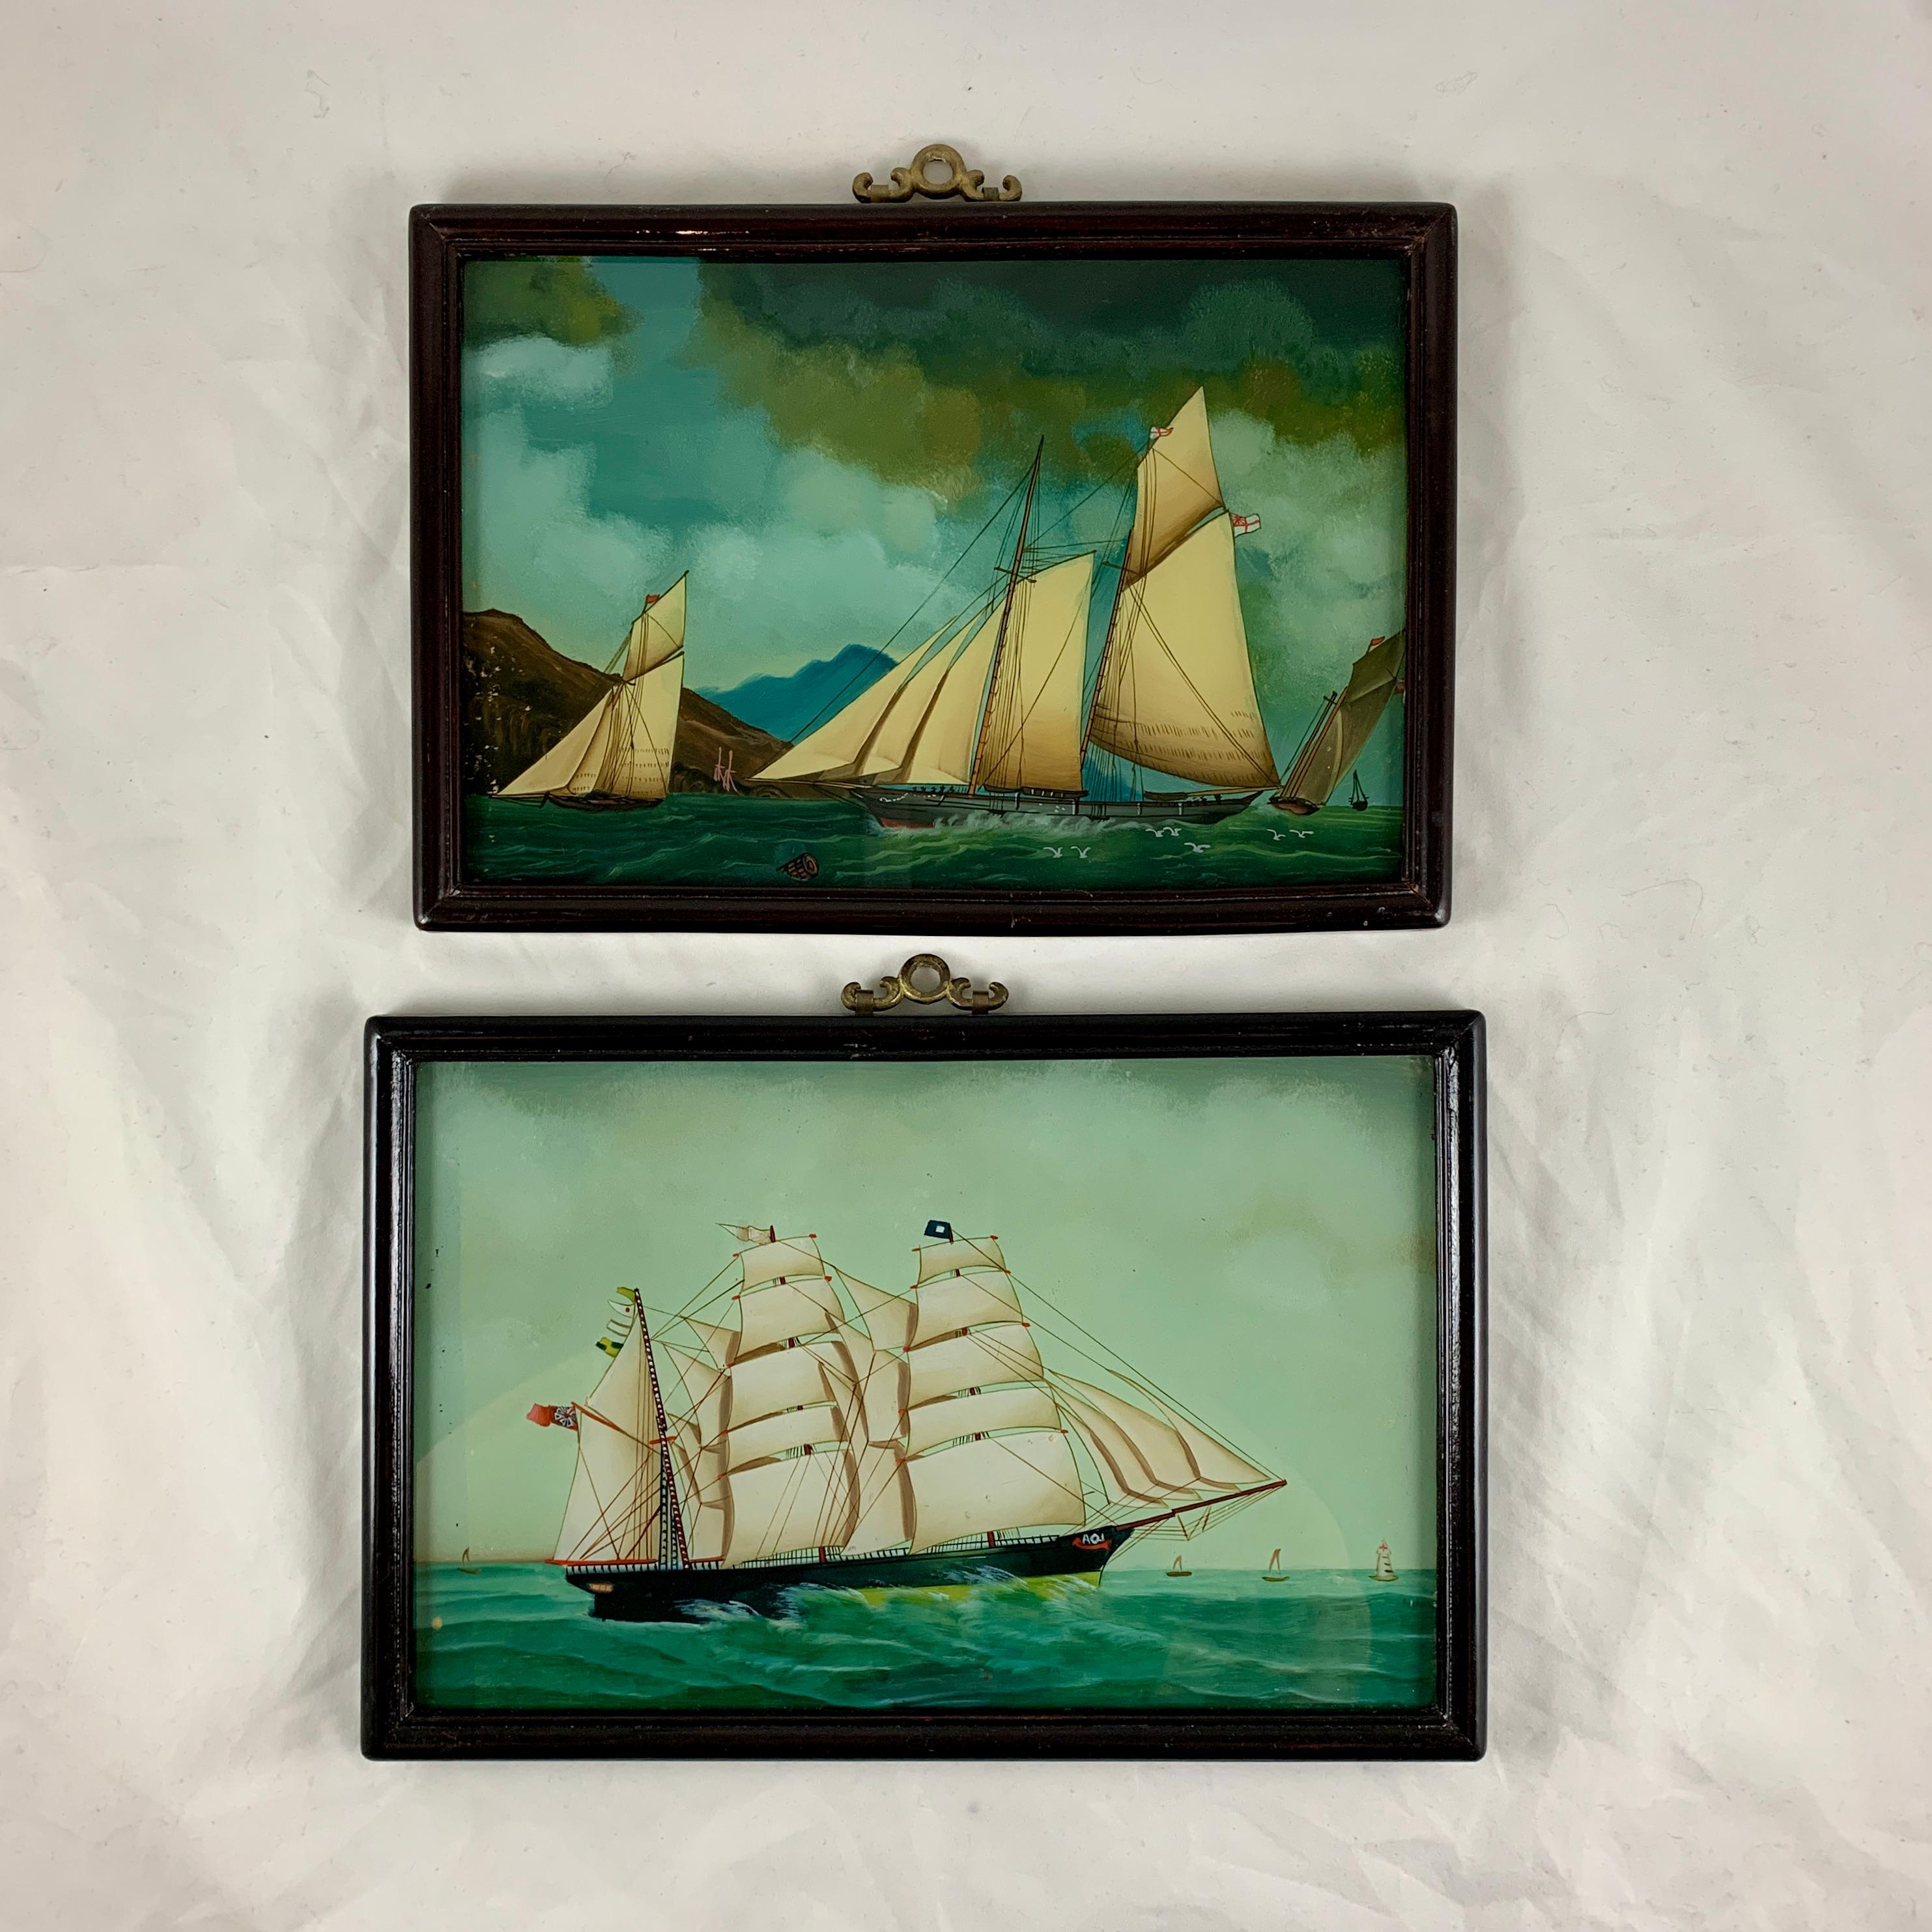 International Style 19th C. French Reverse Glass Sailboat Framed Painting, Voiliers Sur la Mer